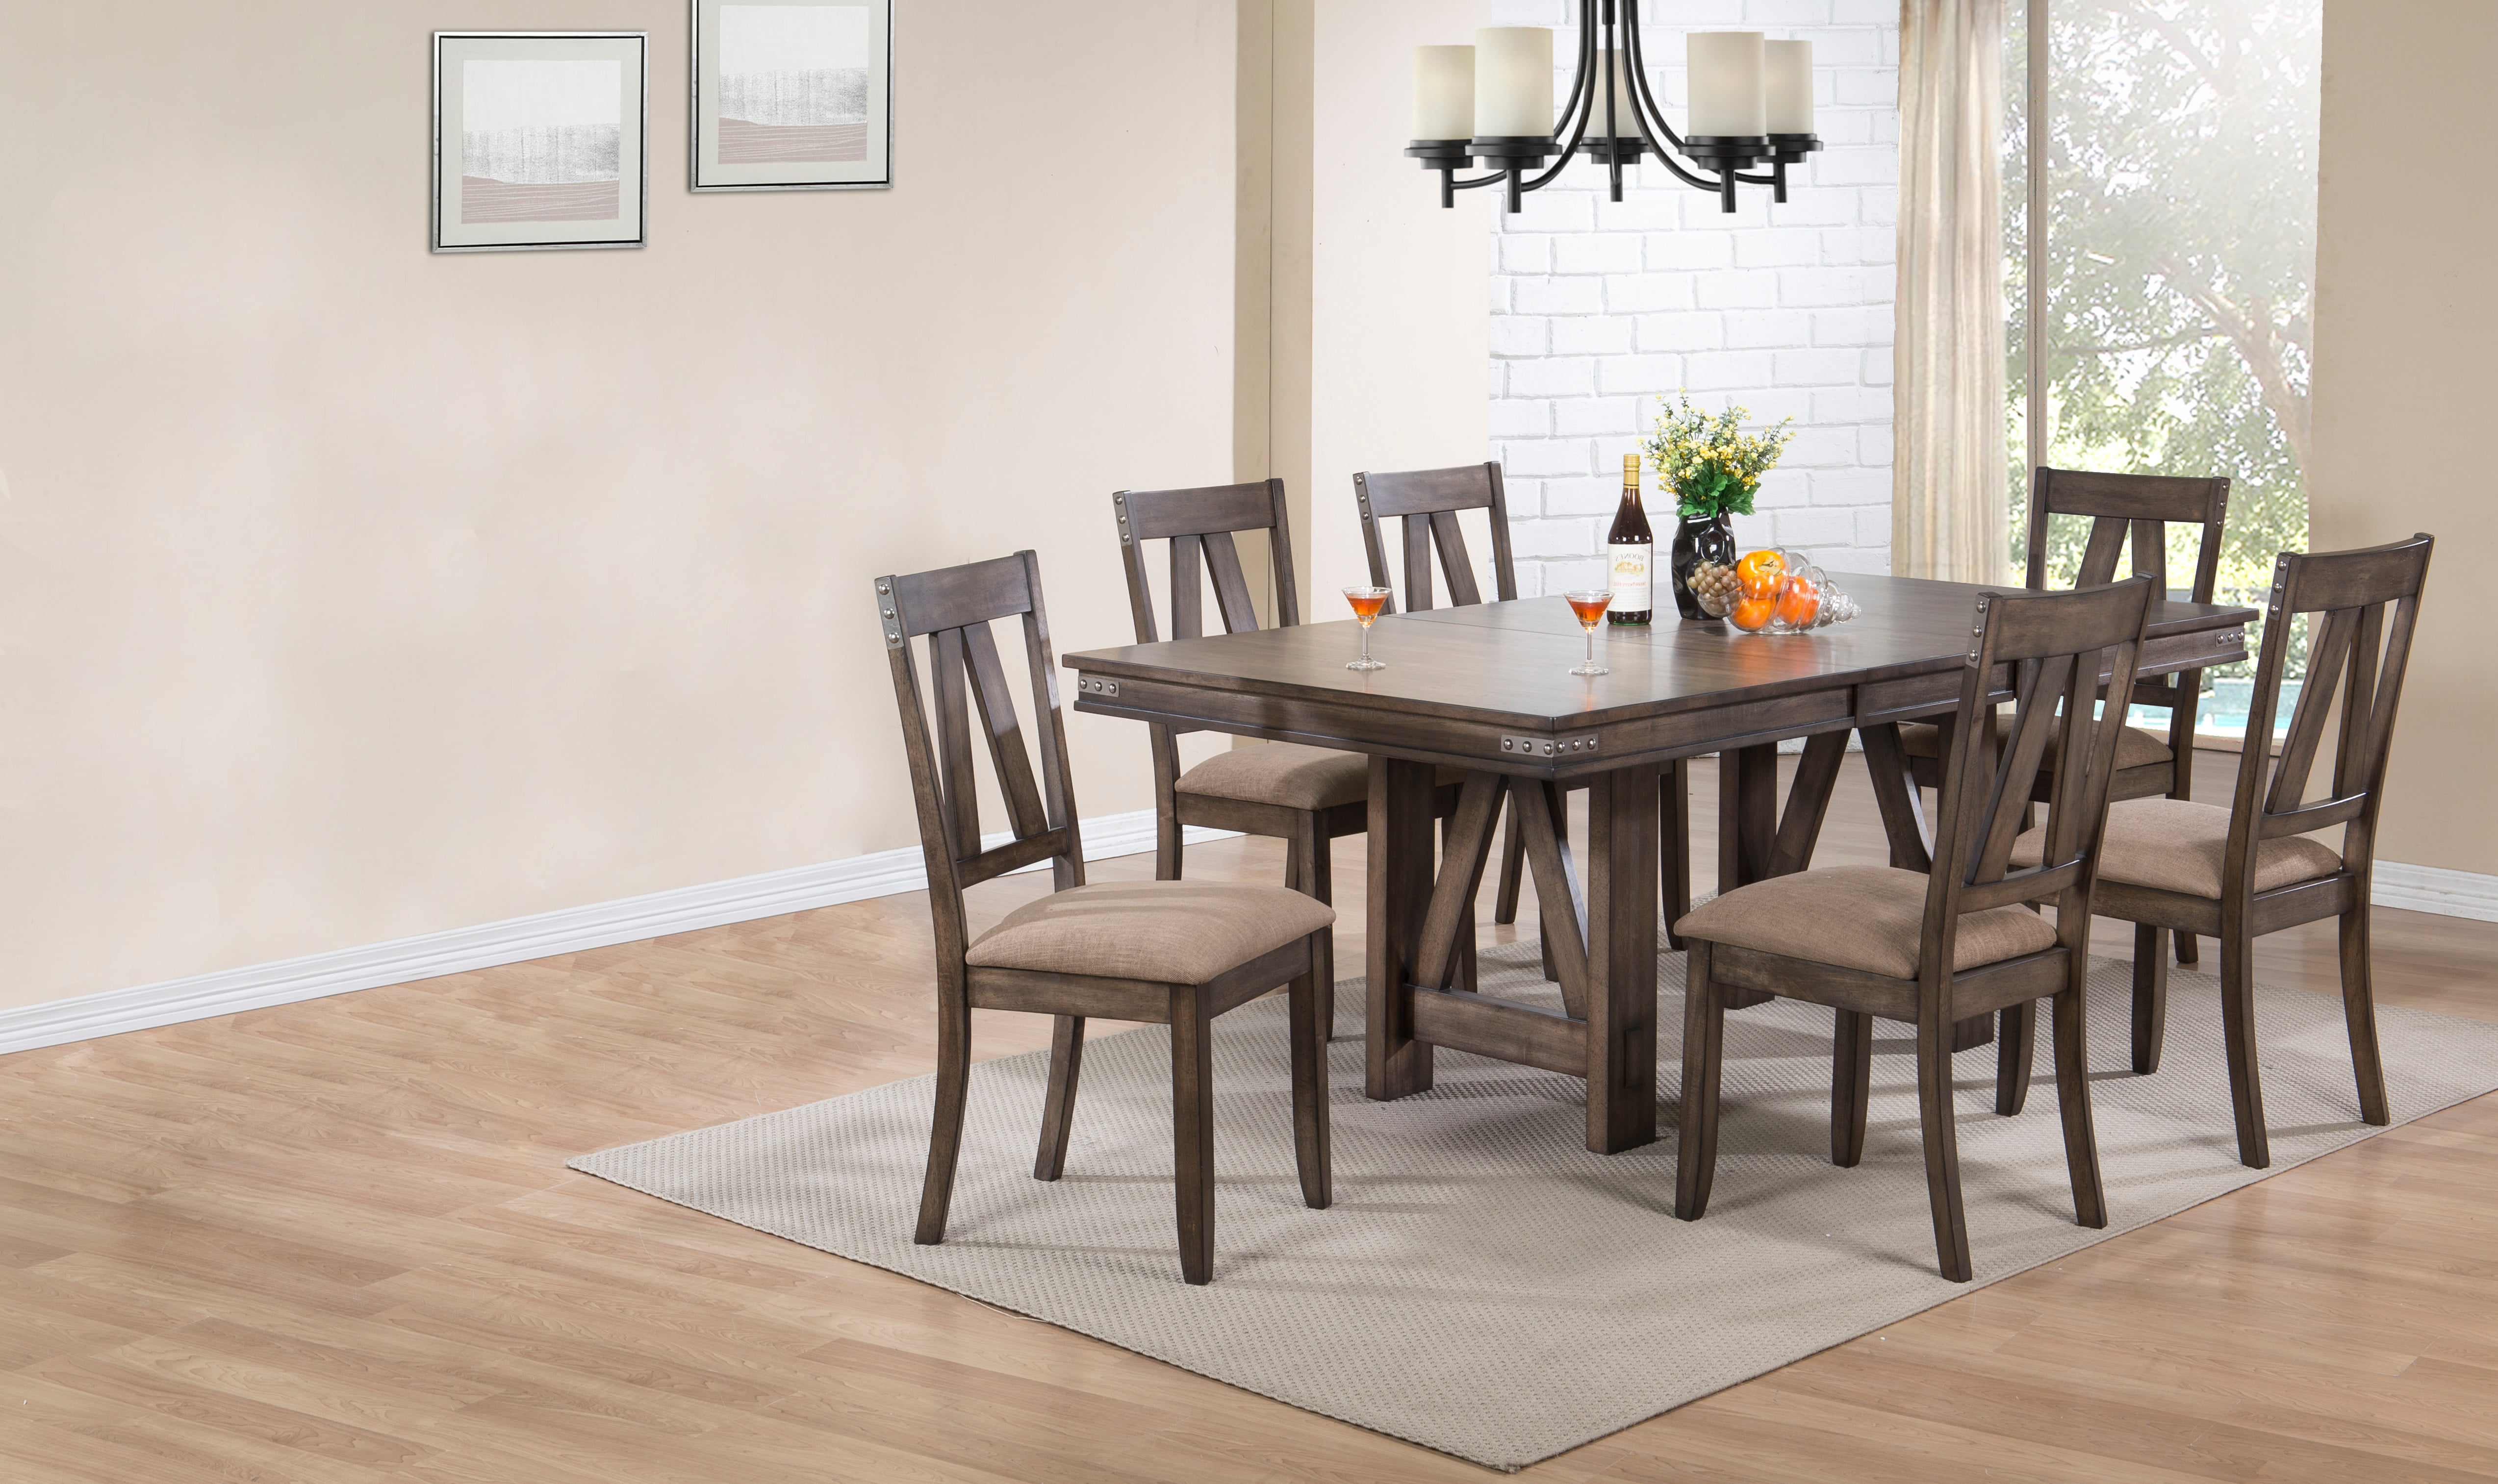 Nets 7 Piece Formal Dining Room Set, Brown Wood, Transitional (Table